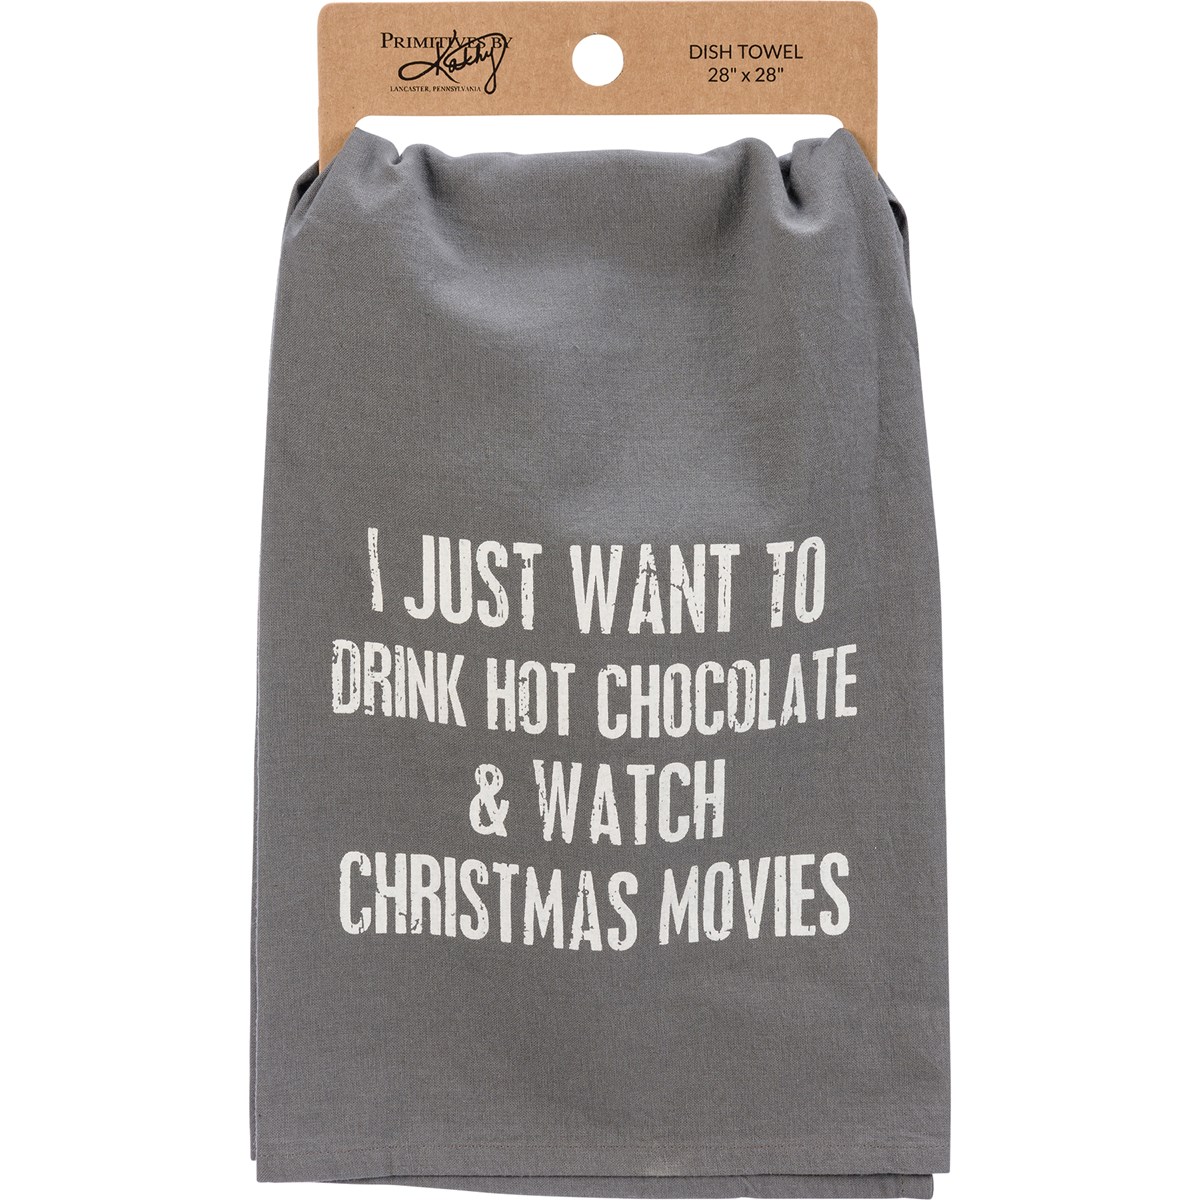 Hot Chocolate & Christmas Movies Kitchen Towel - Cotton